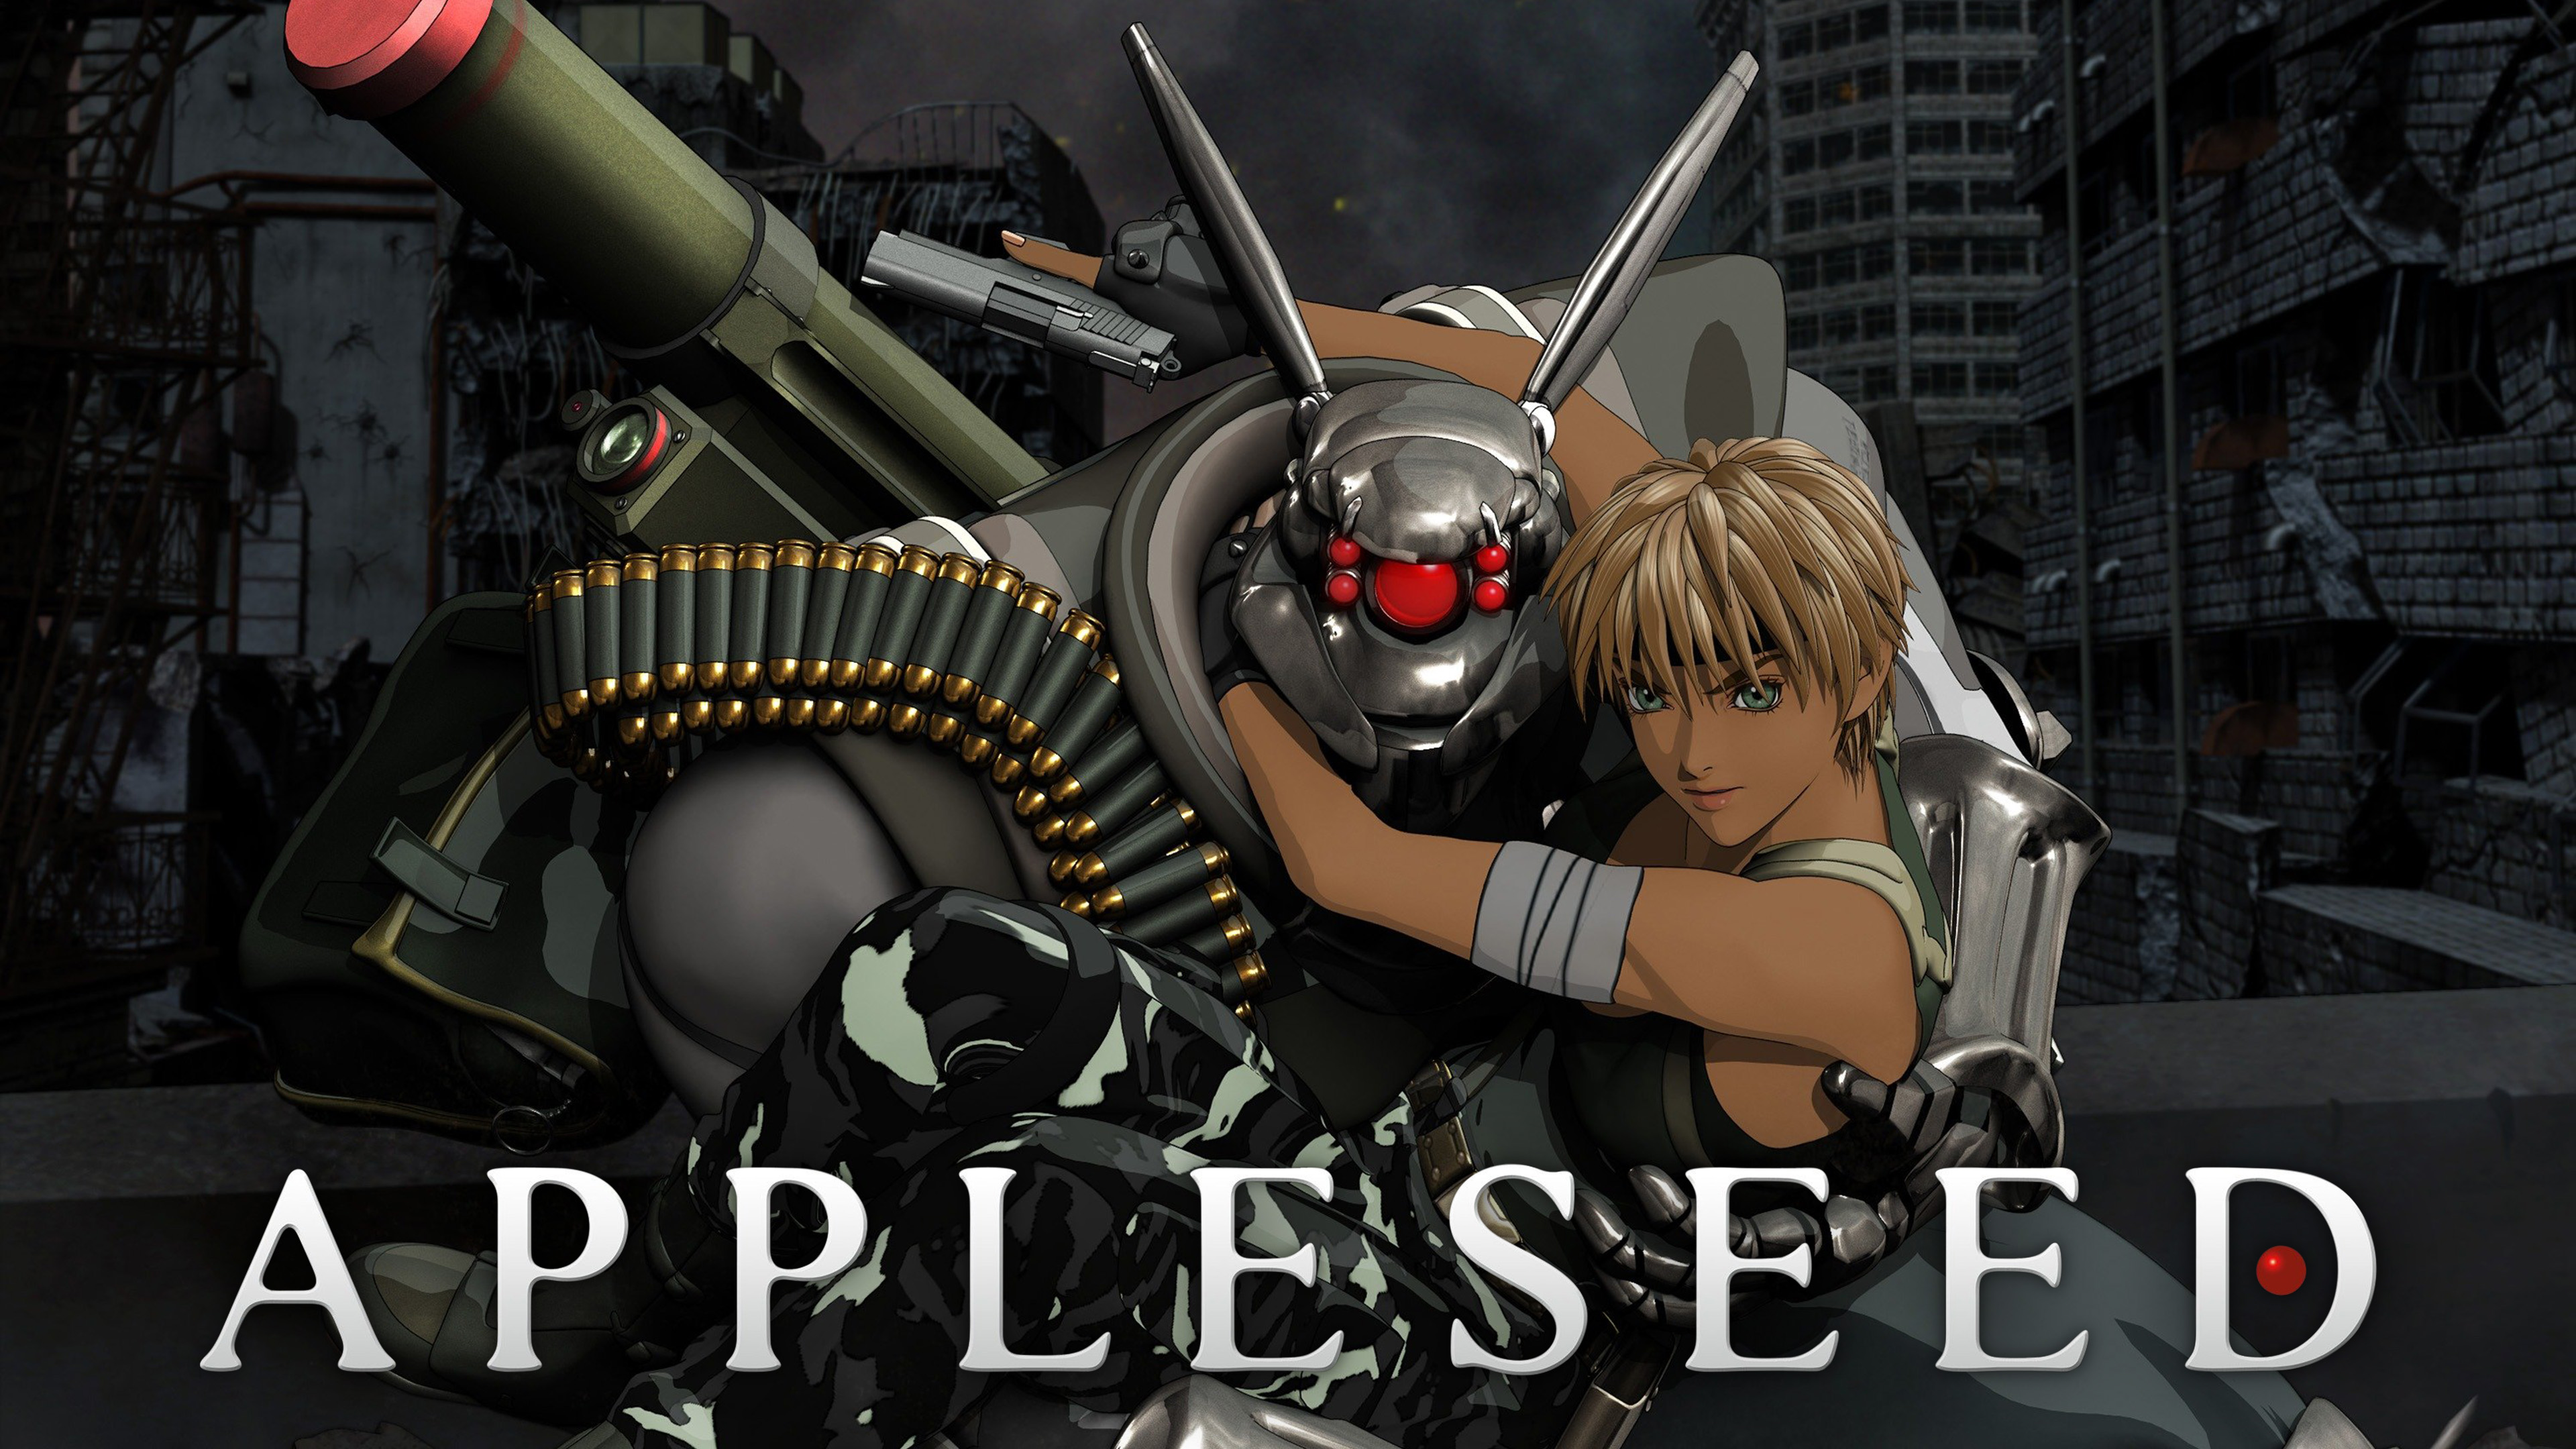 Appleseed streaming: where to watch movie online?